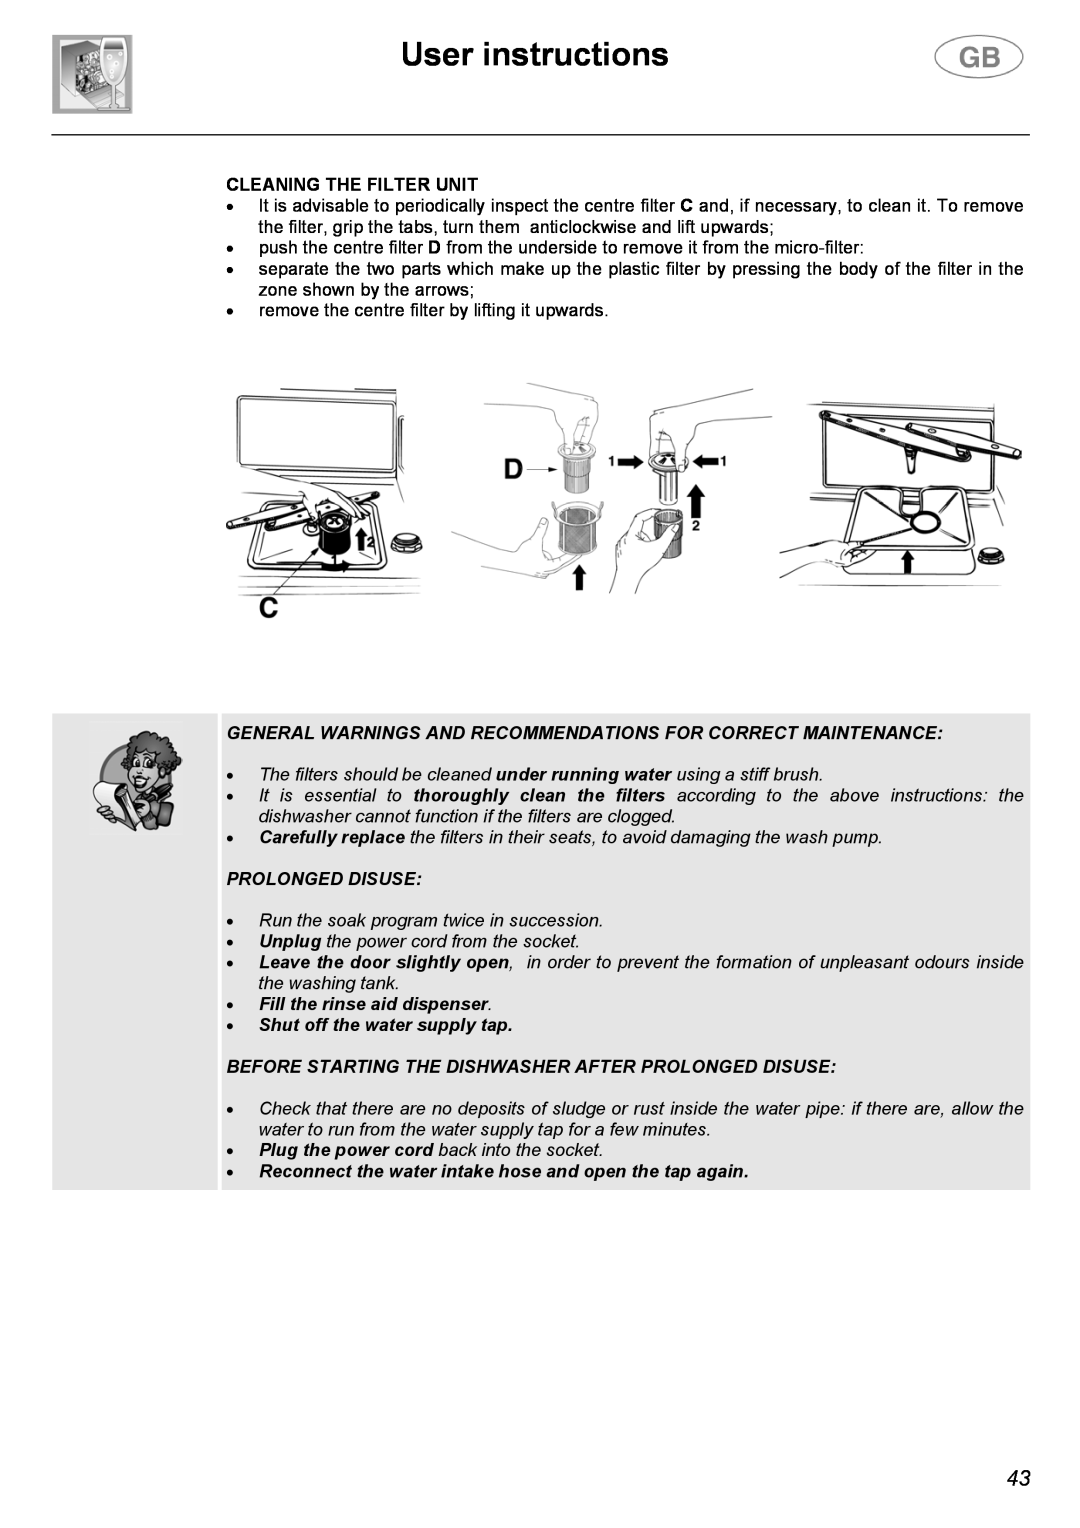 Smeg CA01-1 instruction manual User instructions, Cleaning The Filter Unit, Prolonged Disuse, Fill the rinse aid dispenser 